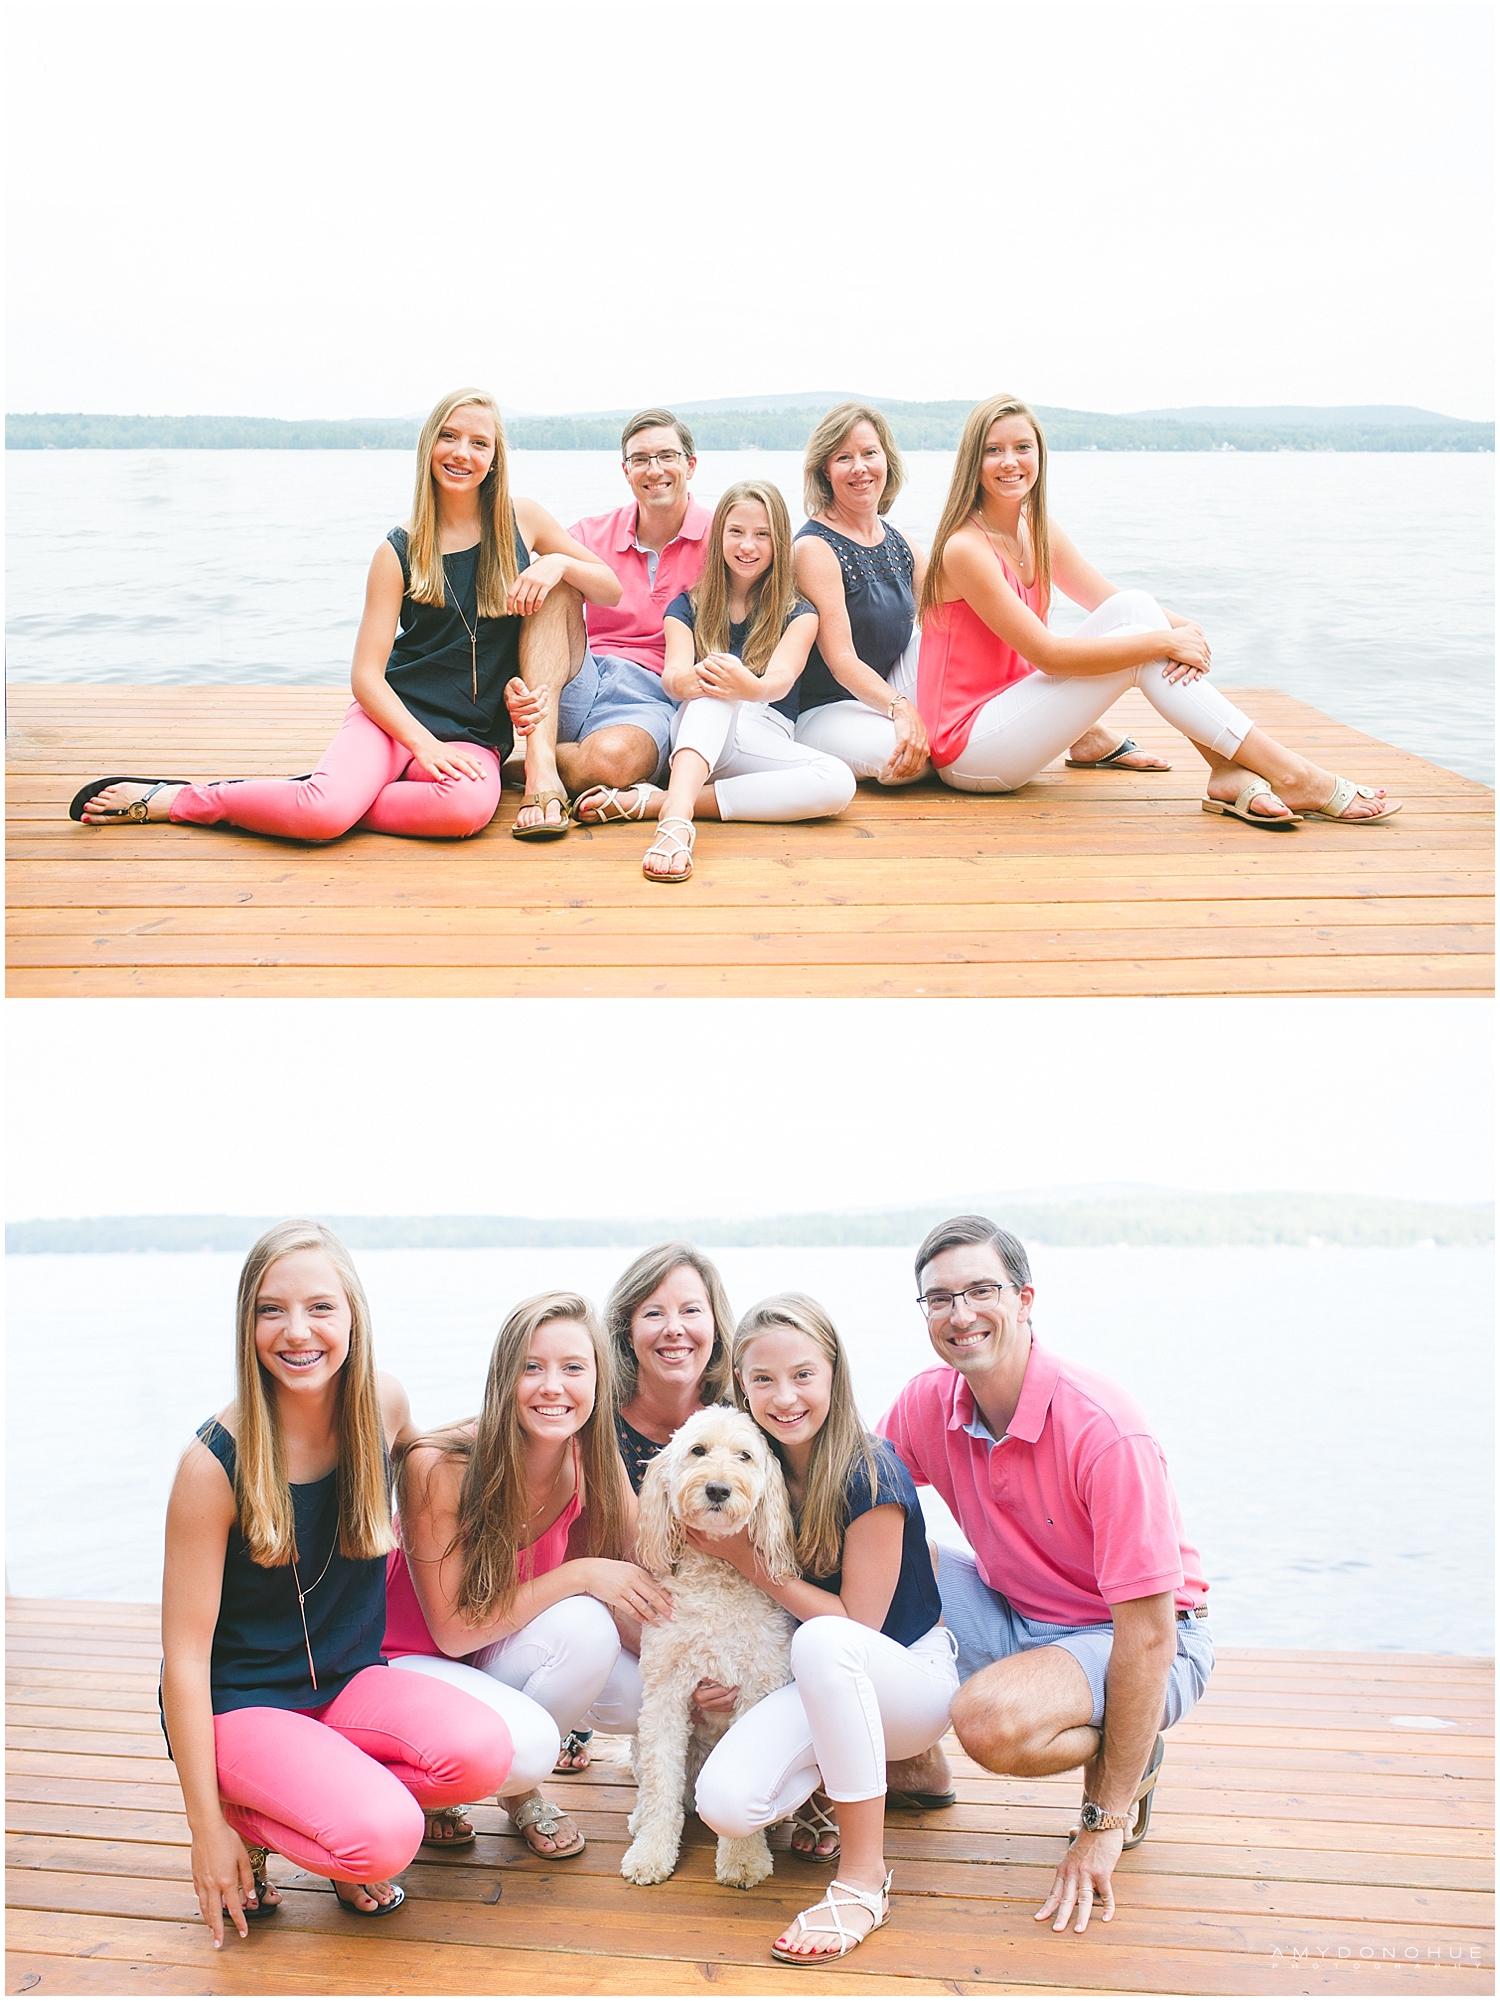 Vermont Family Photographer | Amy Donohue Photography ©